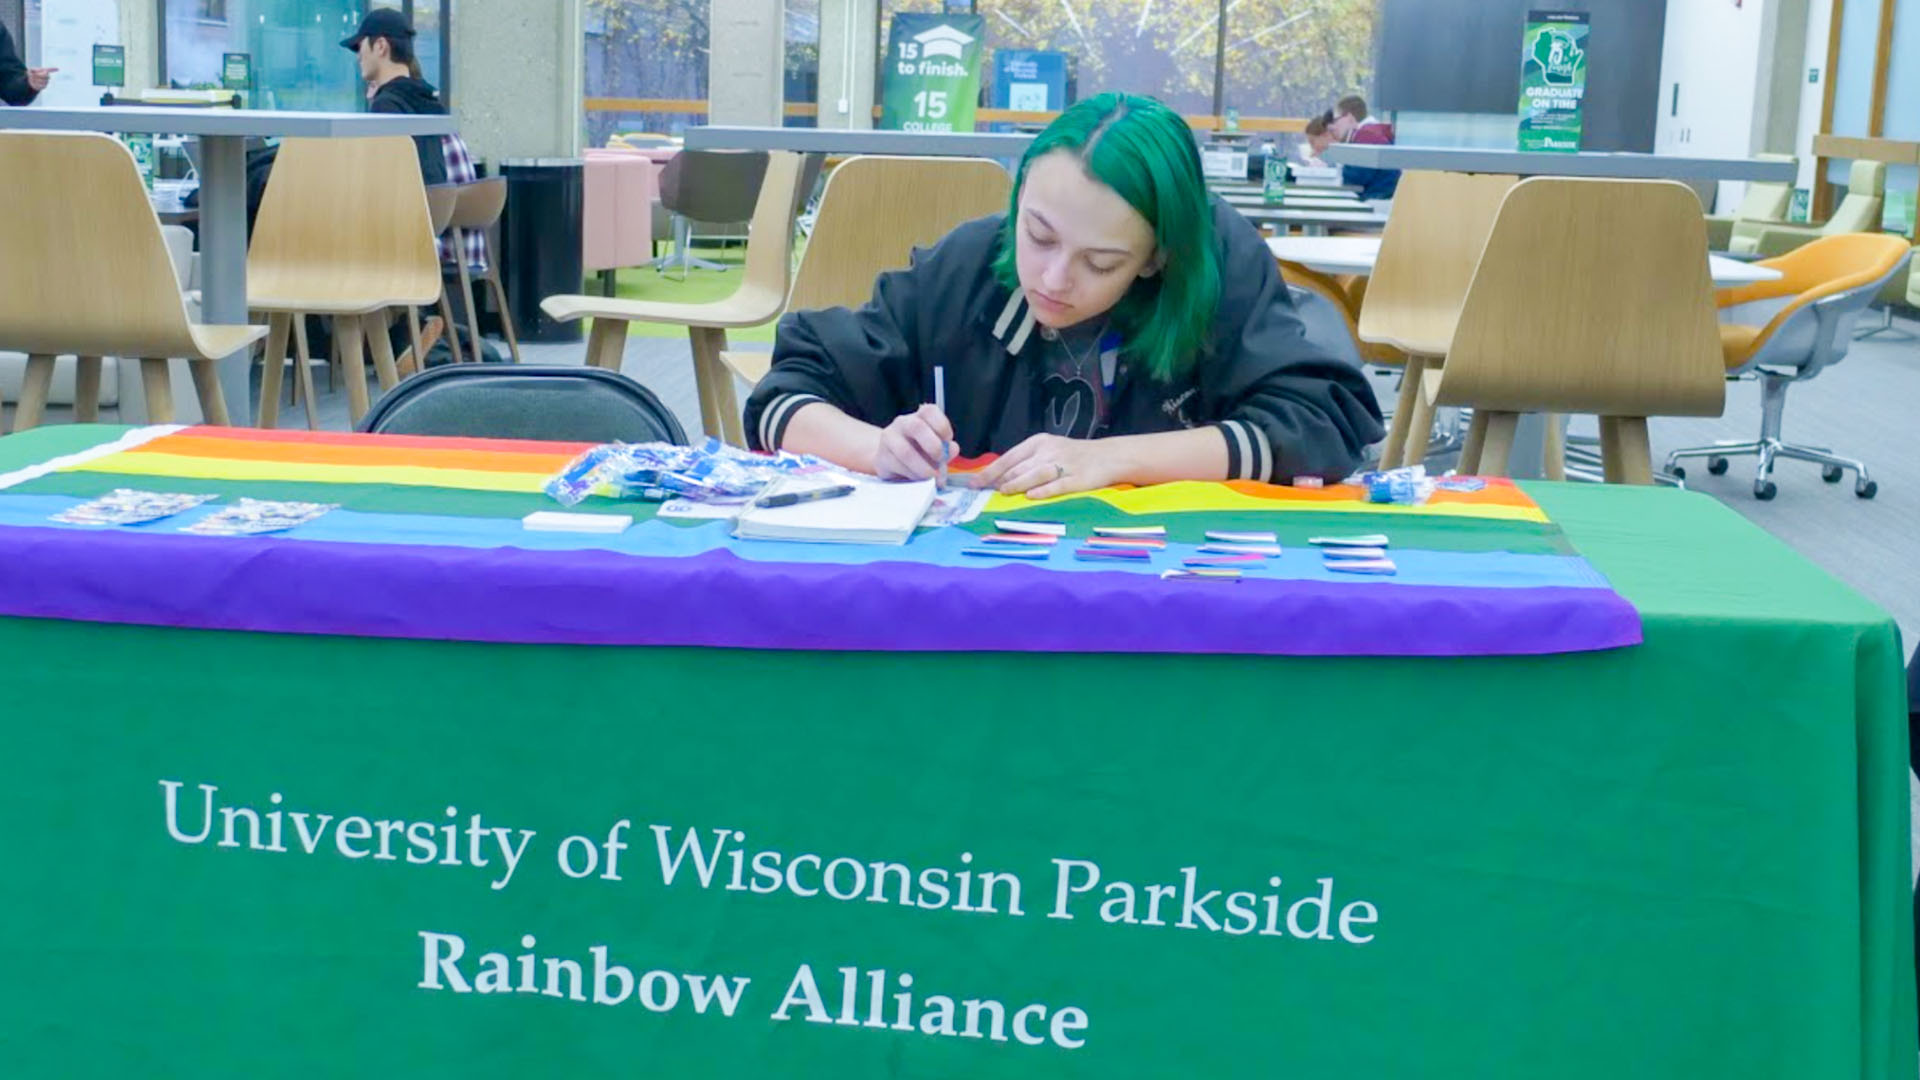 A table showcasing the Rainbow Alliance, an organization based around supporting and uplifting members of the LGBTQ  community.